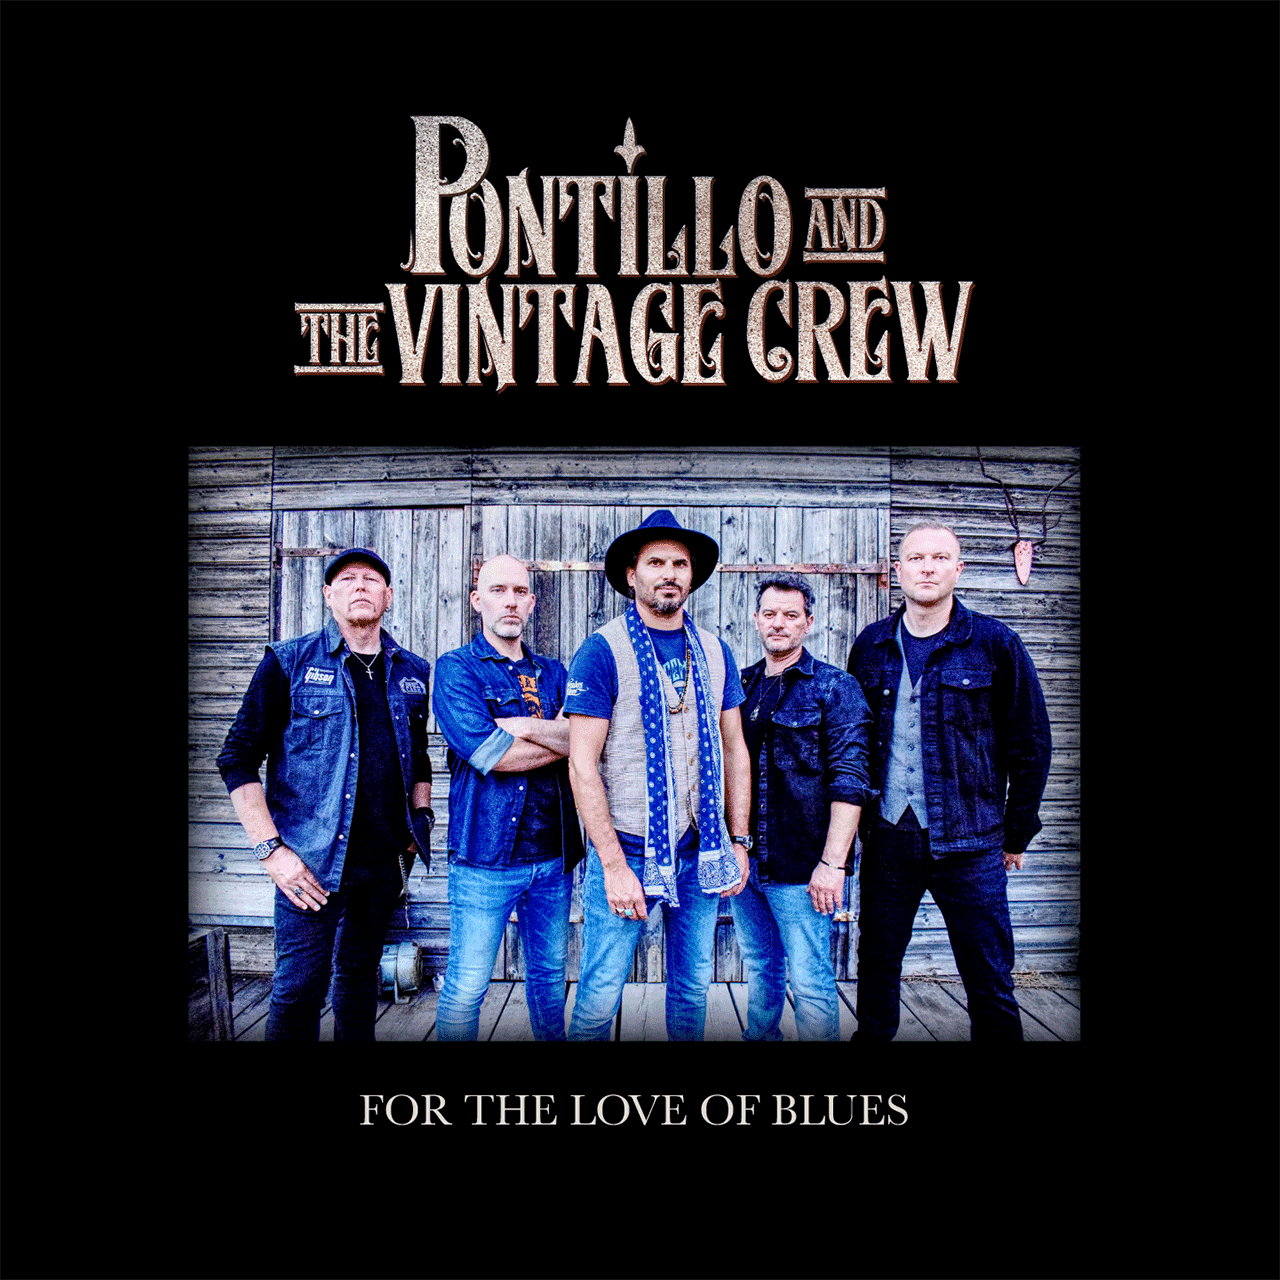 Portillo And The Vintage Crew - For The Love Of Blues